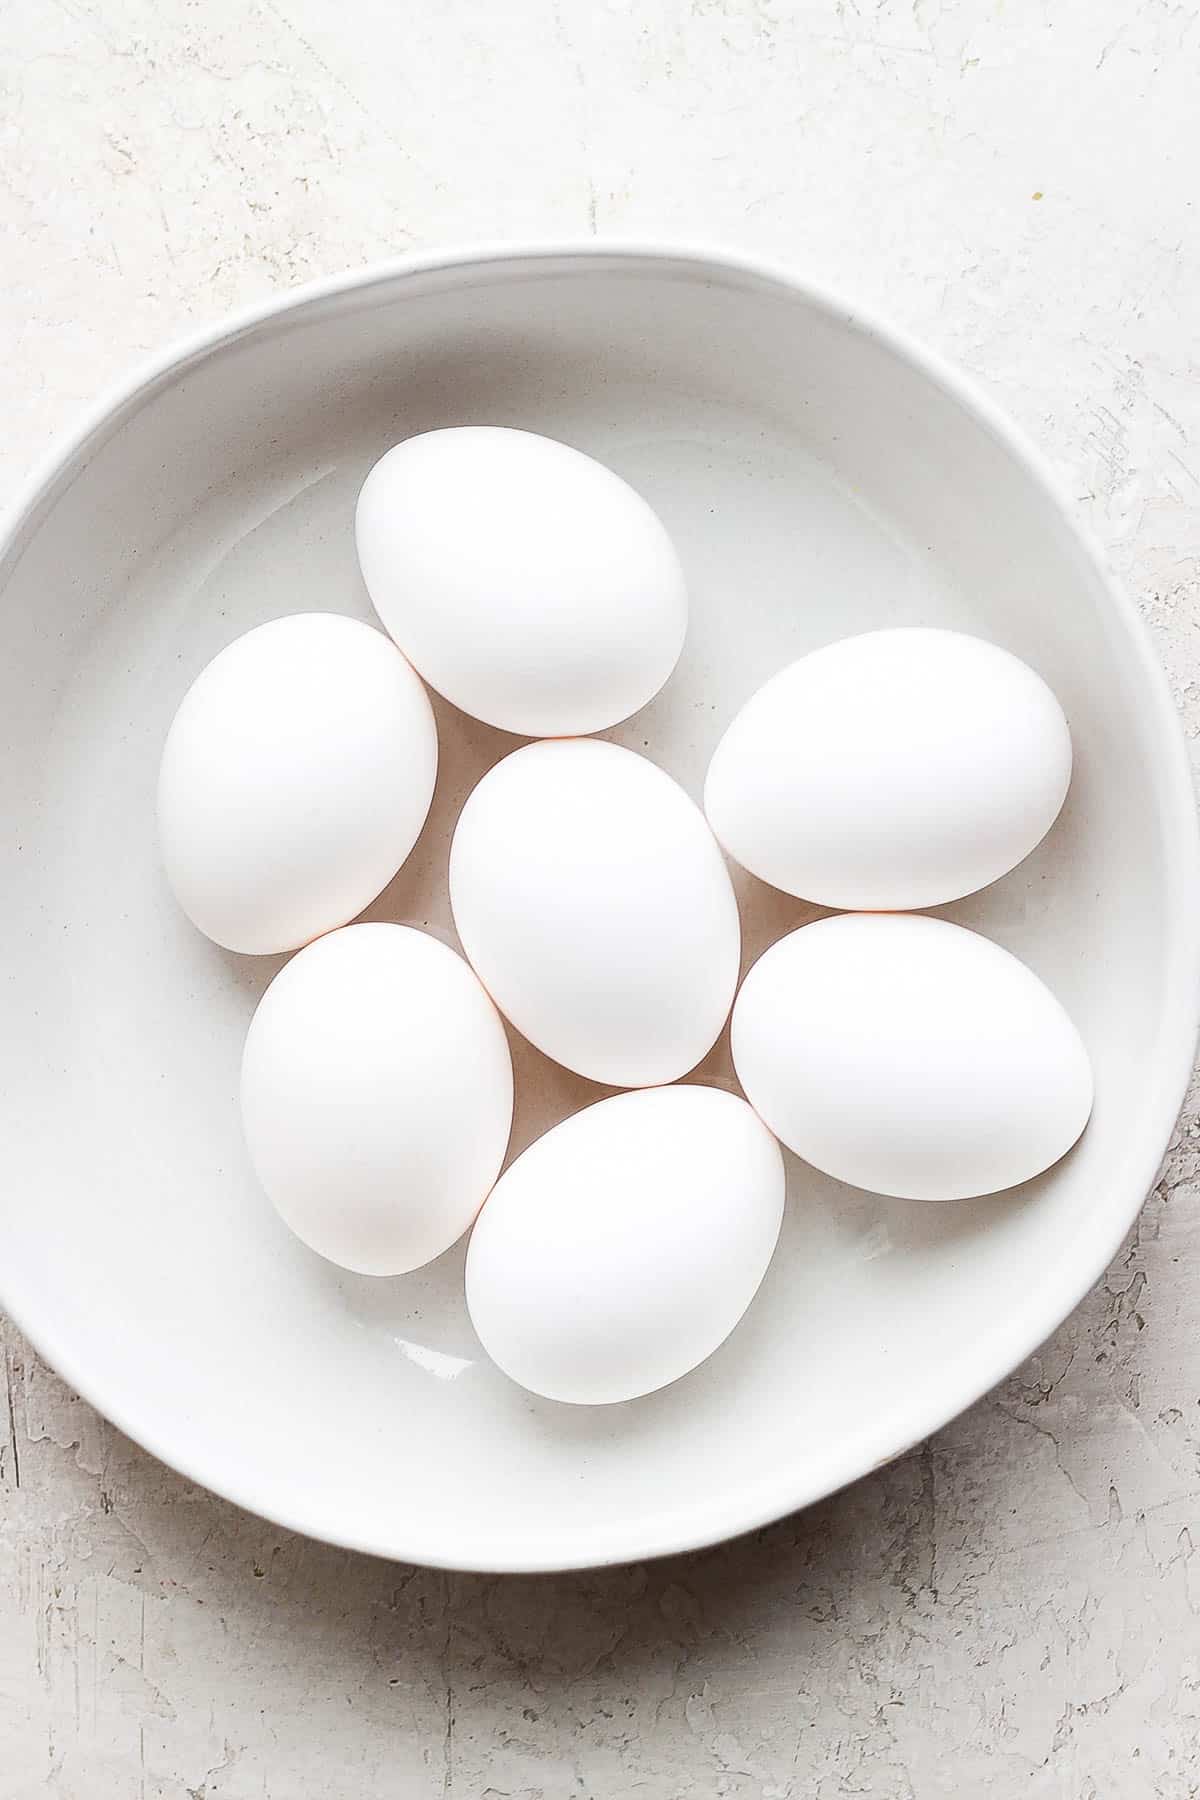 Seven eggs in a shallow bowl.